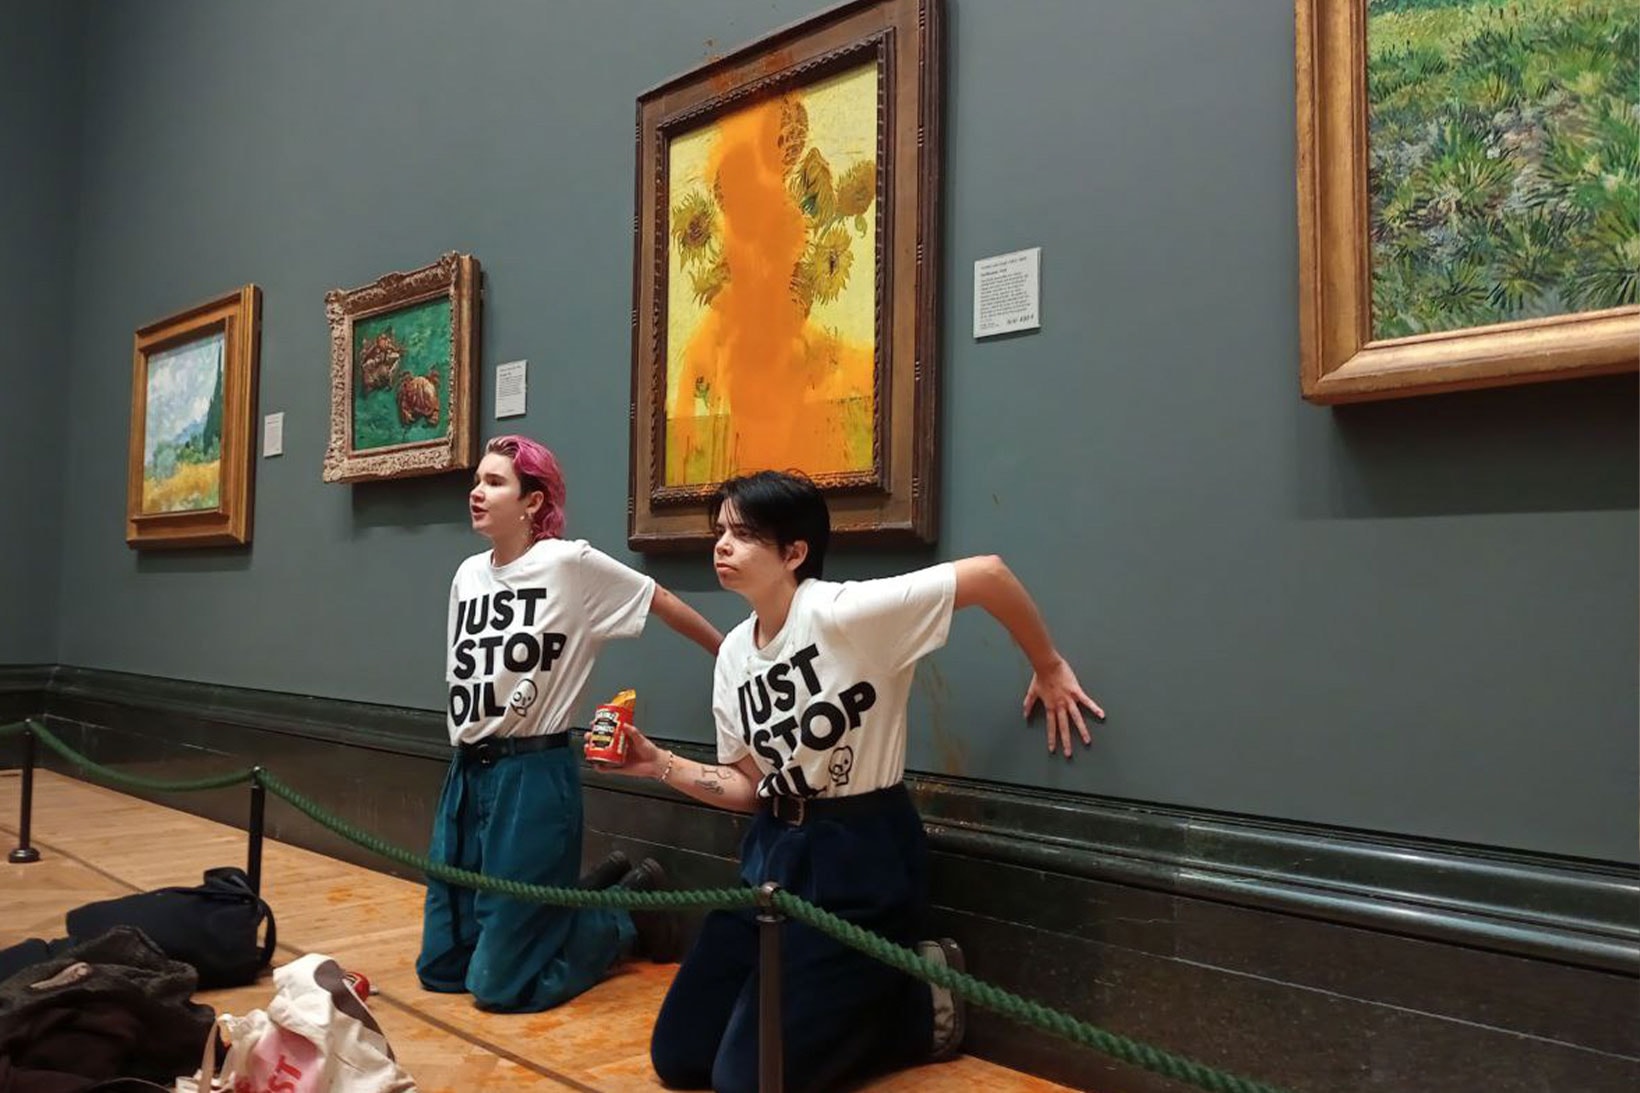 Van Gogh Sunflowers Anti Fossil Fuel Protestors Soup Can Damaged Charged Criminal Offense News